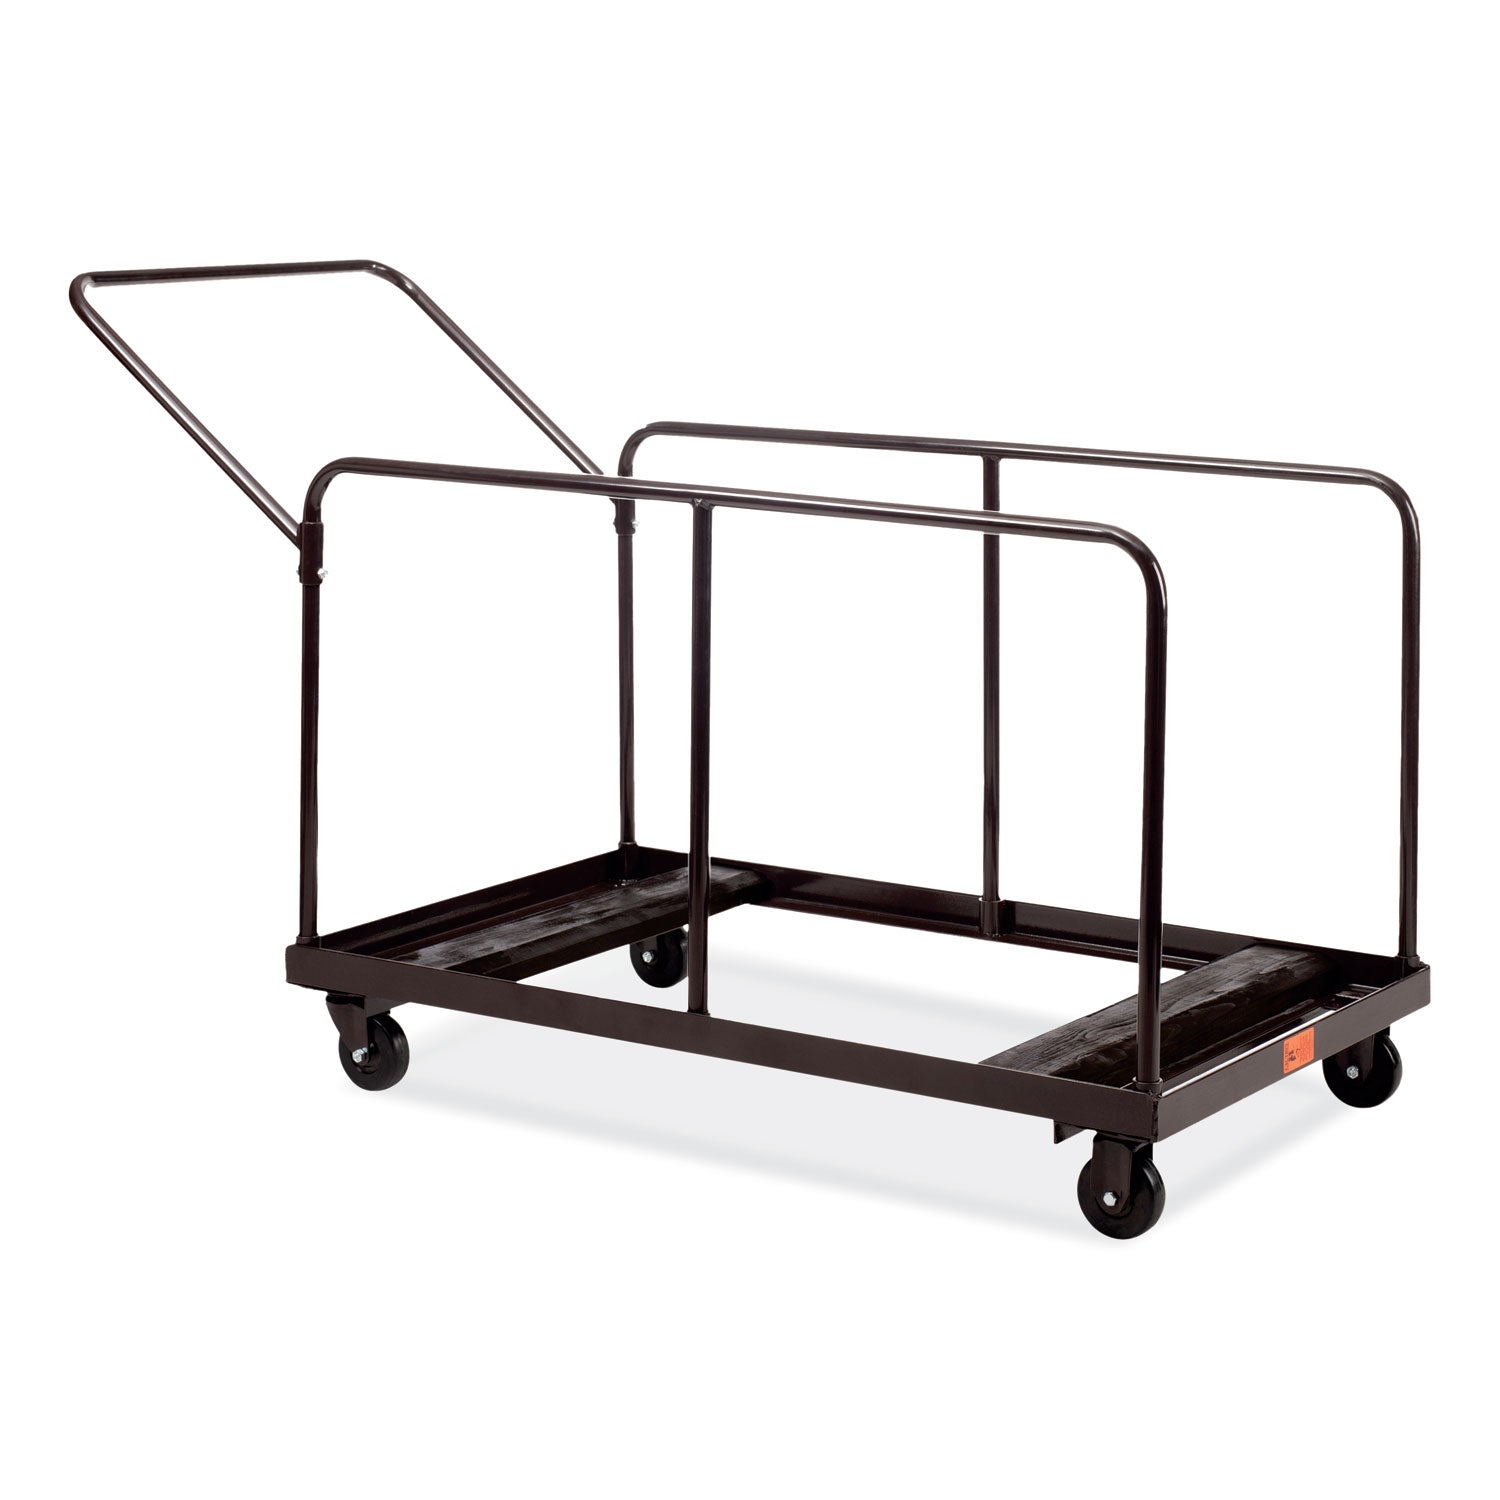 folding-table-dolly-for-round-and-rectangular-tables-660-lb-capacity-3125-x-2775-x-475-brownships-in-1-3-business-days_npsdymu - 1